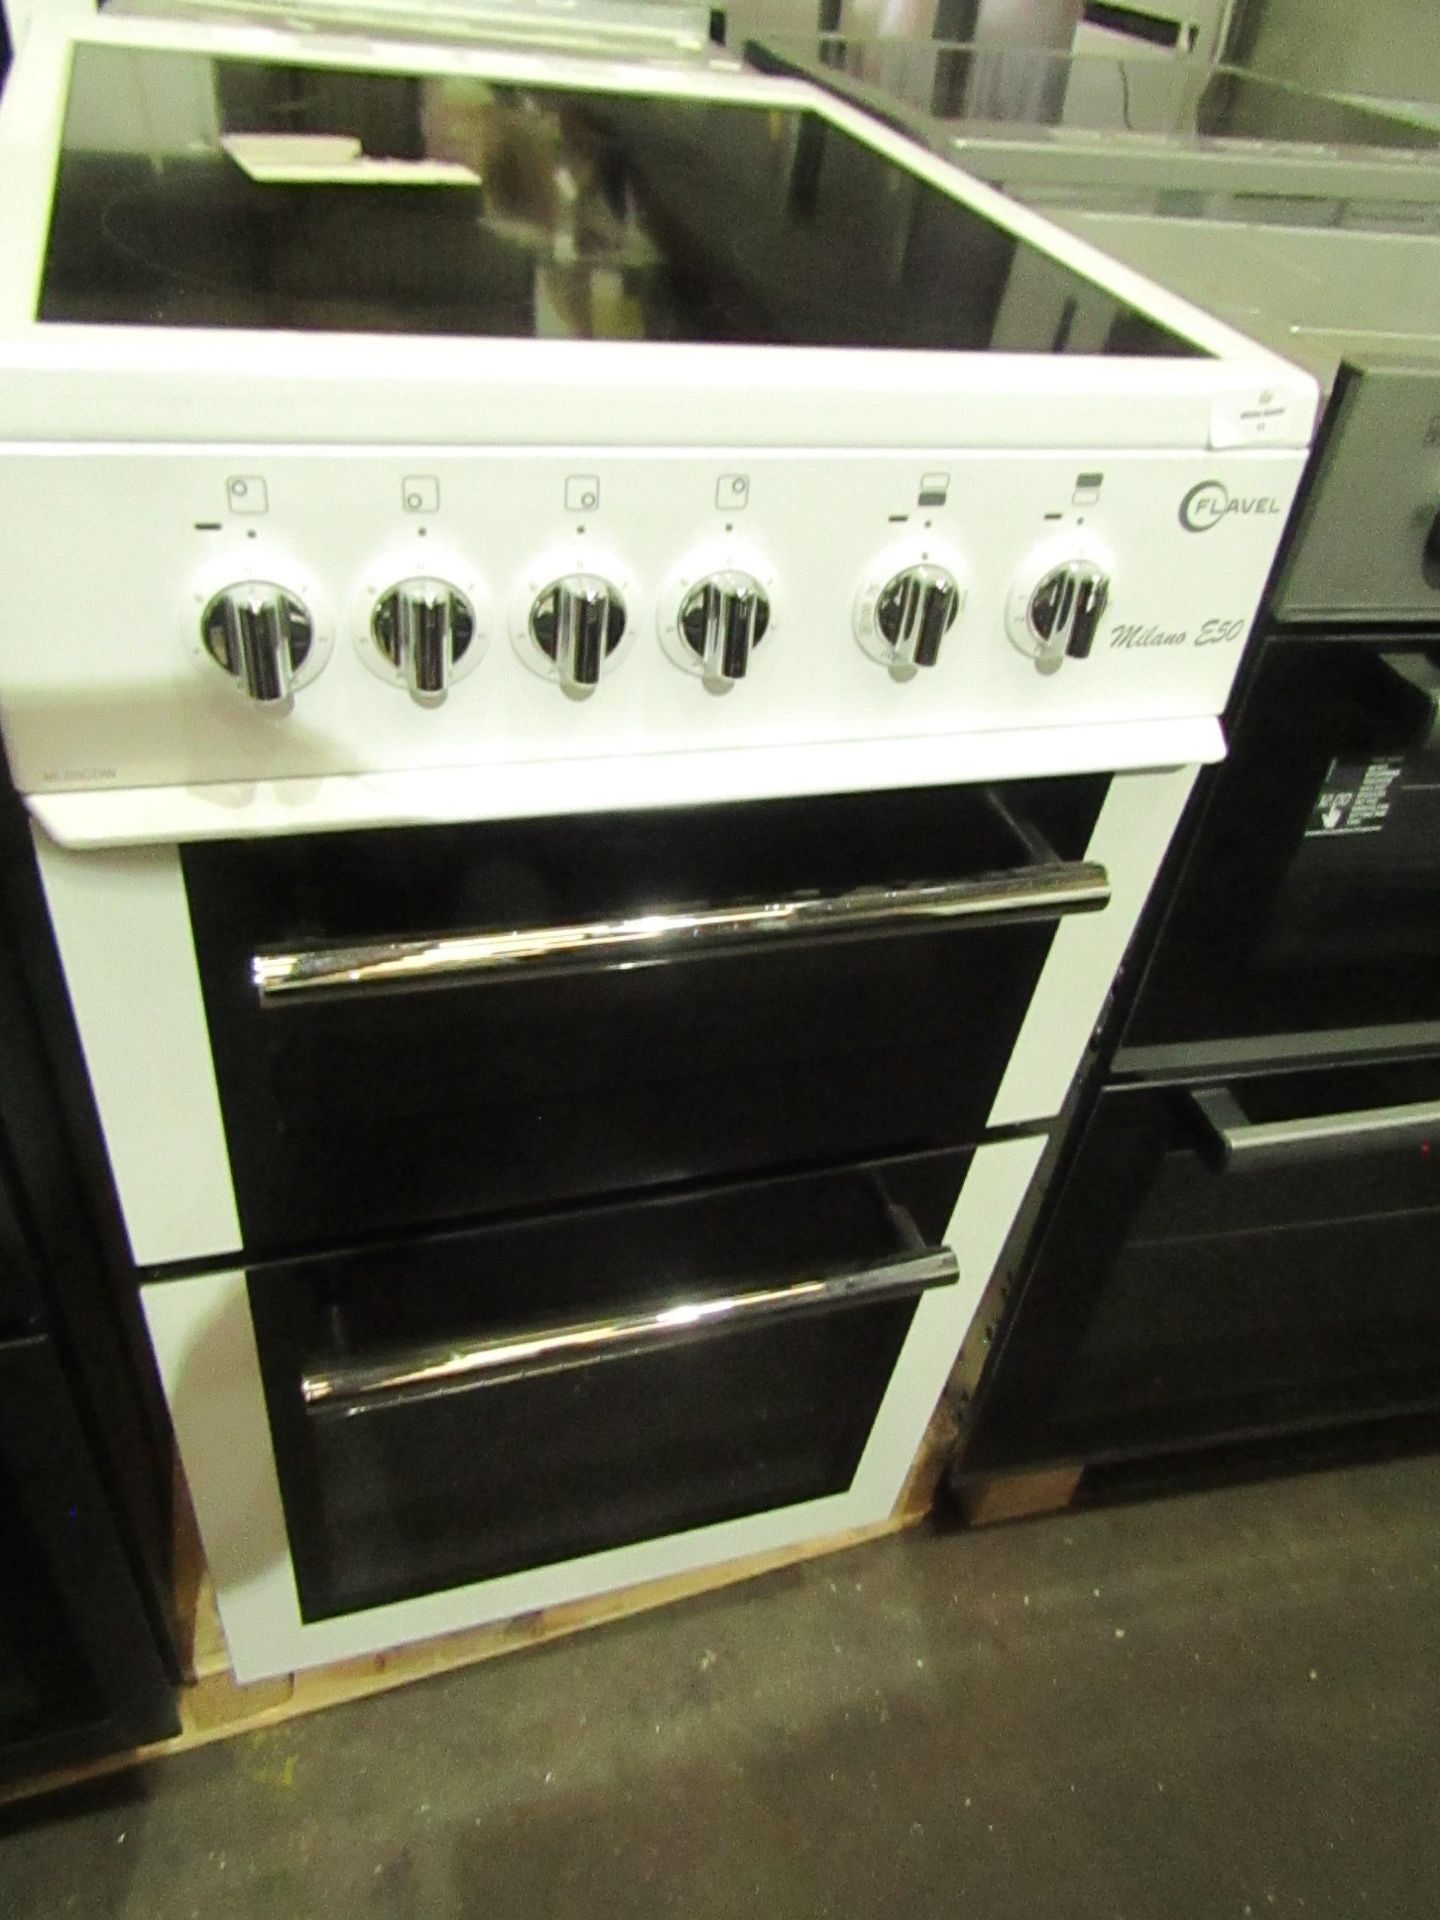 FLAVEL Electric Ceramic Cooker White MLB5CDW RRP “?389.00 - This item looks to be in good